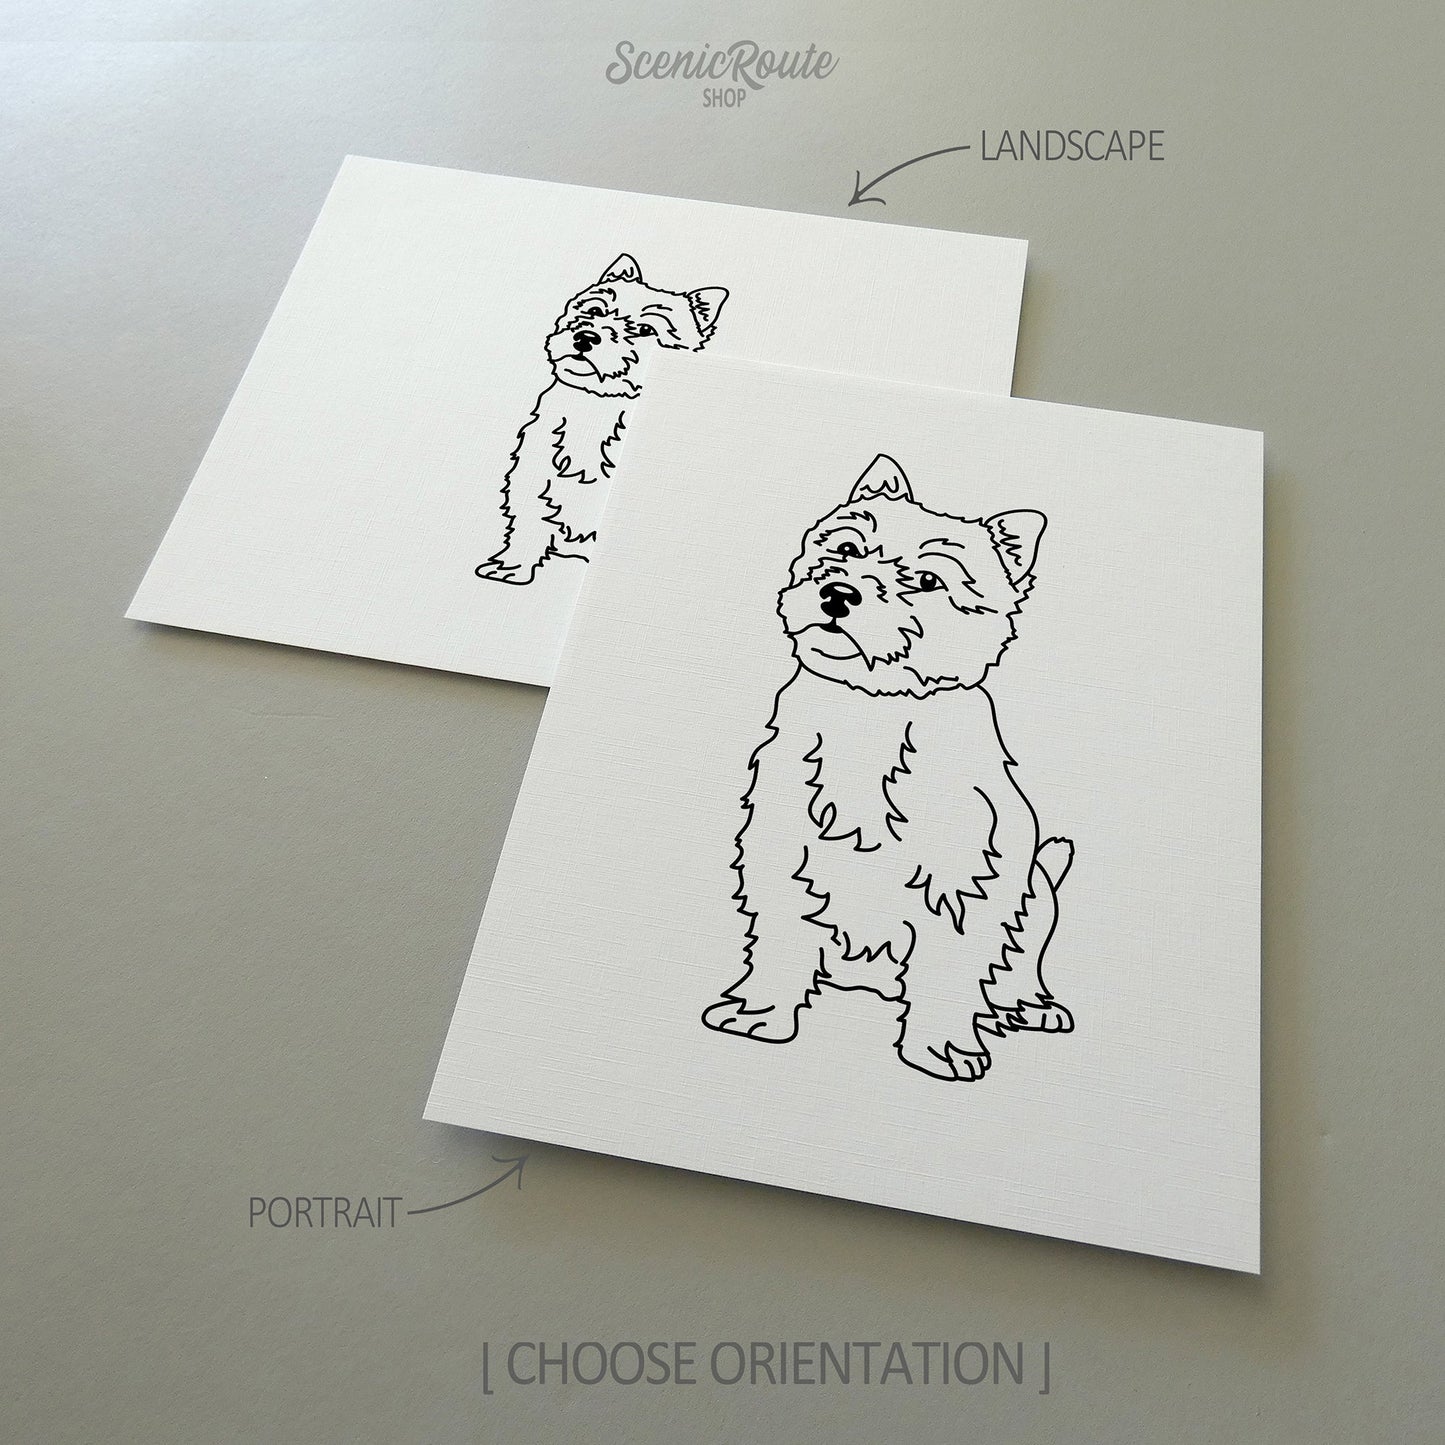 Two line art drawings of a Norwich Terrier dog on white linen paper with a gray background.  The pieces are shown in portrait and landscape orientation for the available art print options.